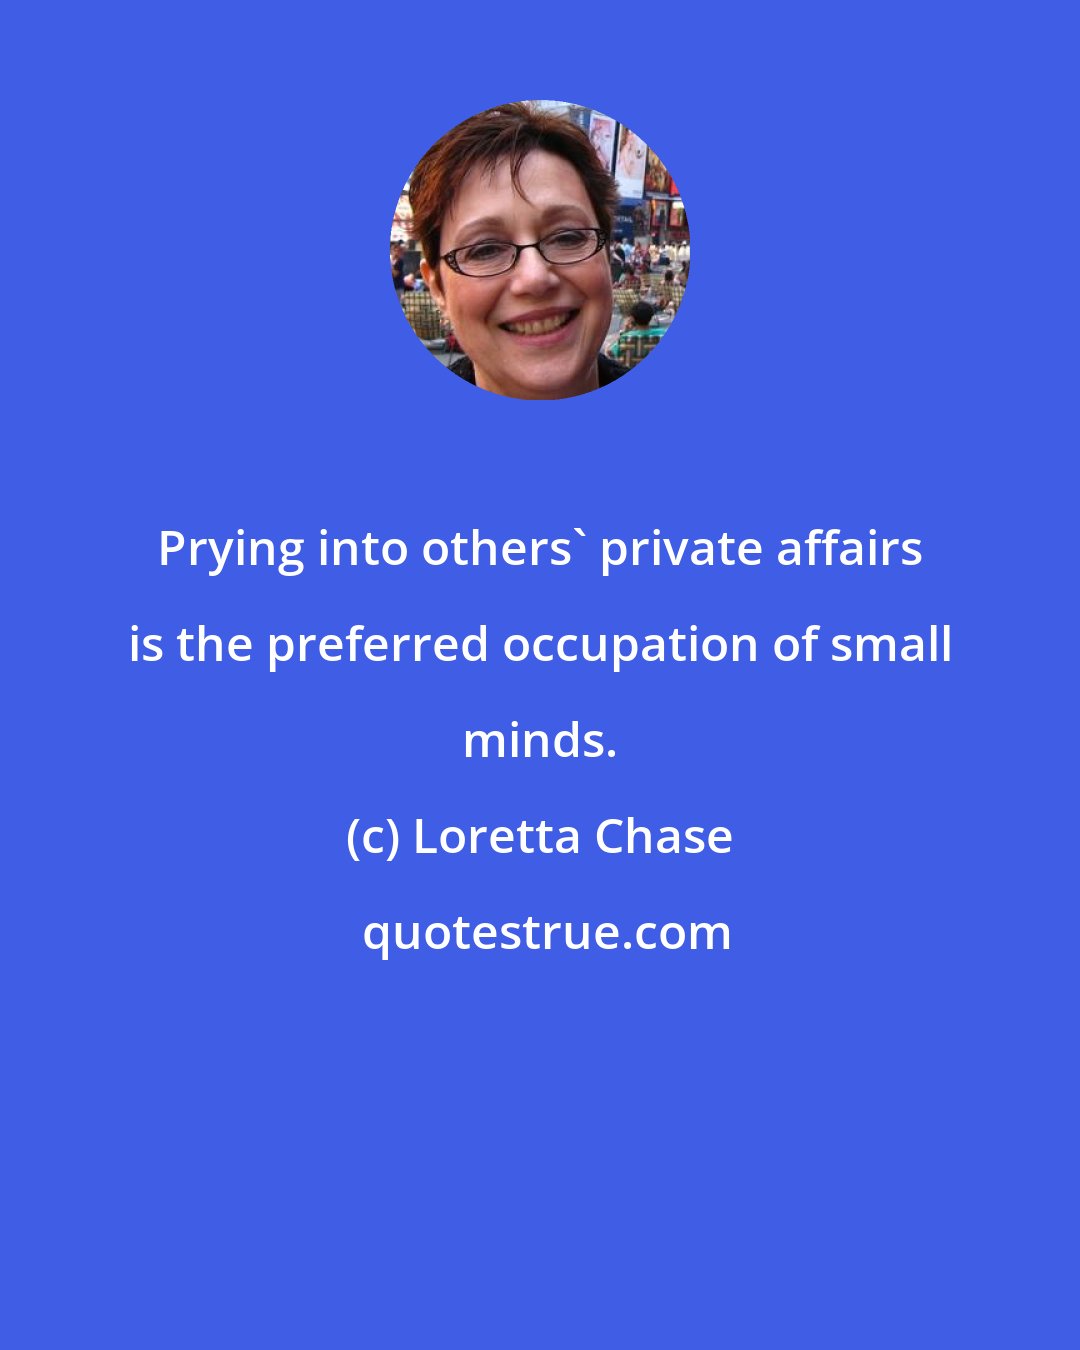 Loretta Chase: Prying into others' private affairs is the preferred occupation of small minds.